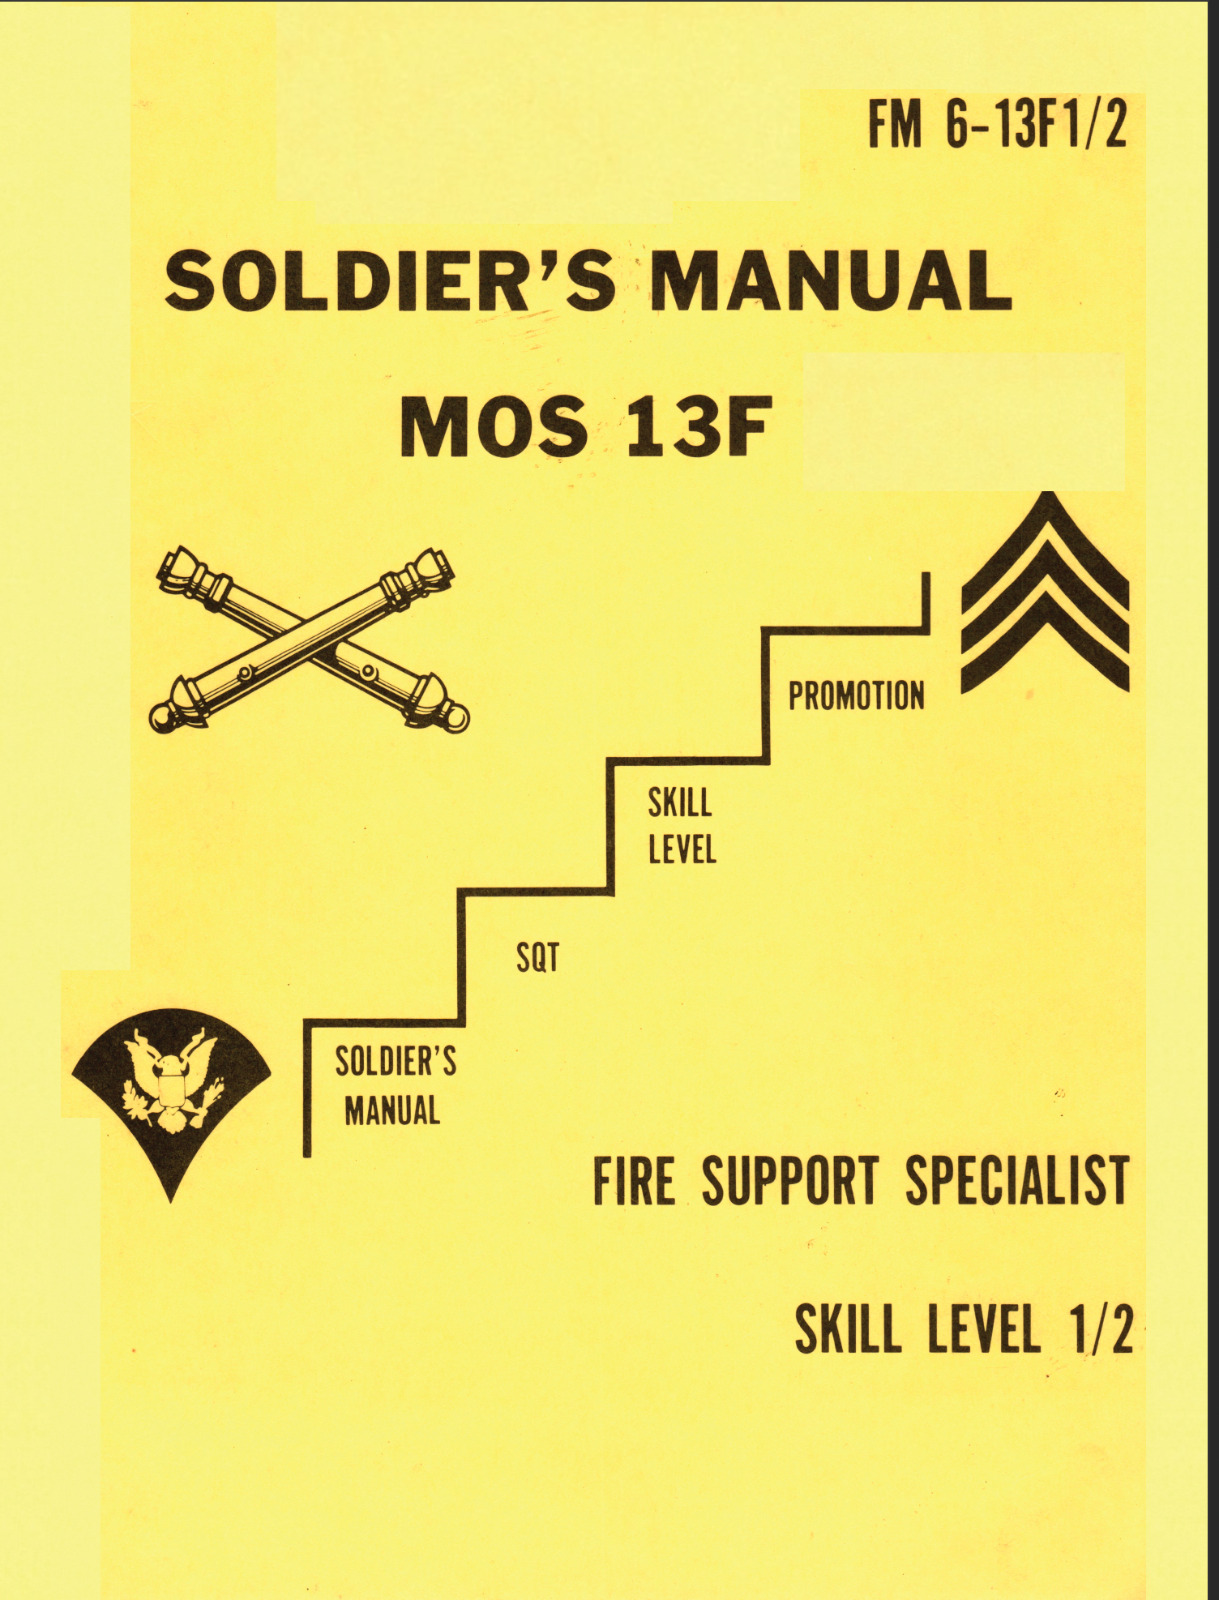 292 Page FM 6-13F 1/2 MOS 13F Fire Support Specialist Field Artillery on Data CD